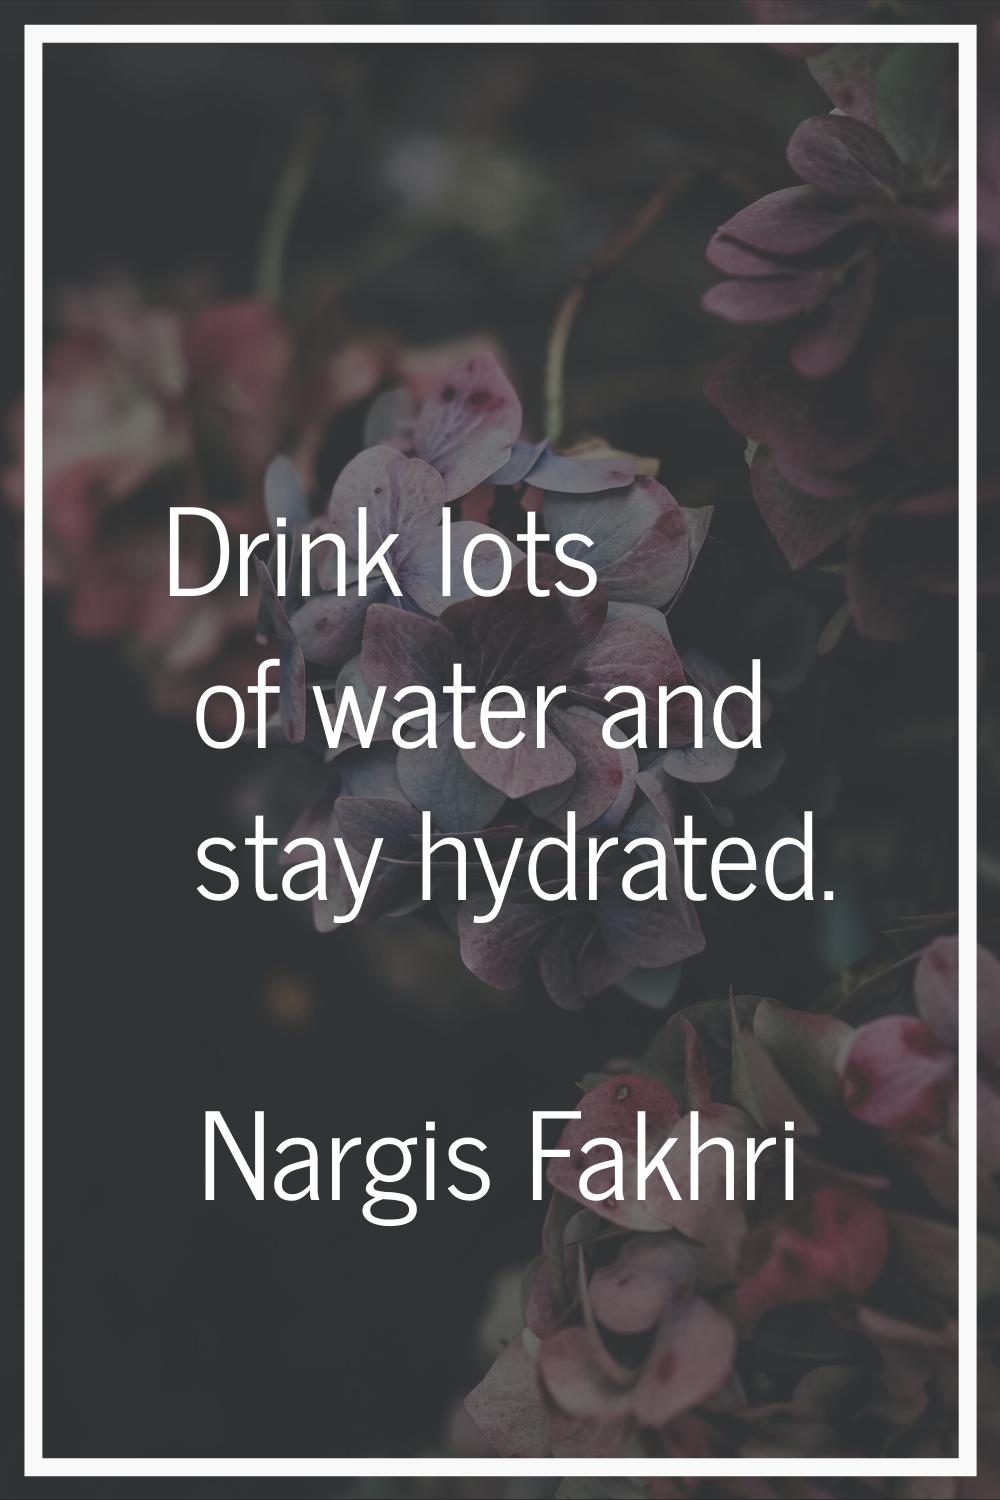 Drink lots of water and stay hydrated.